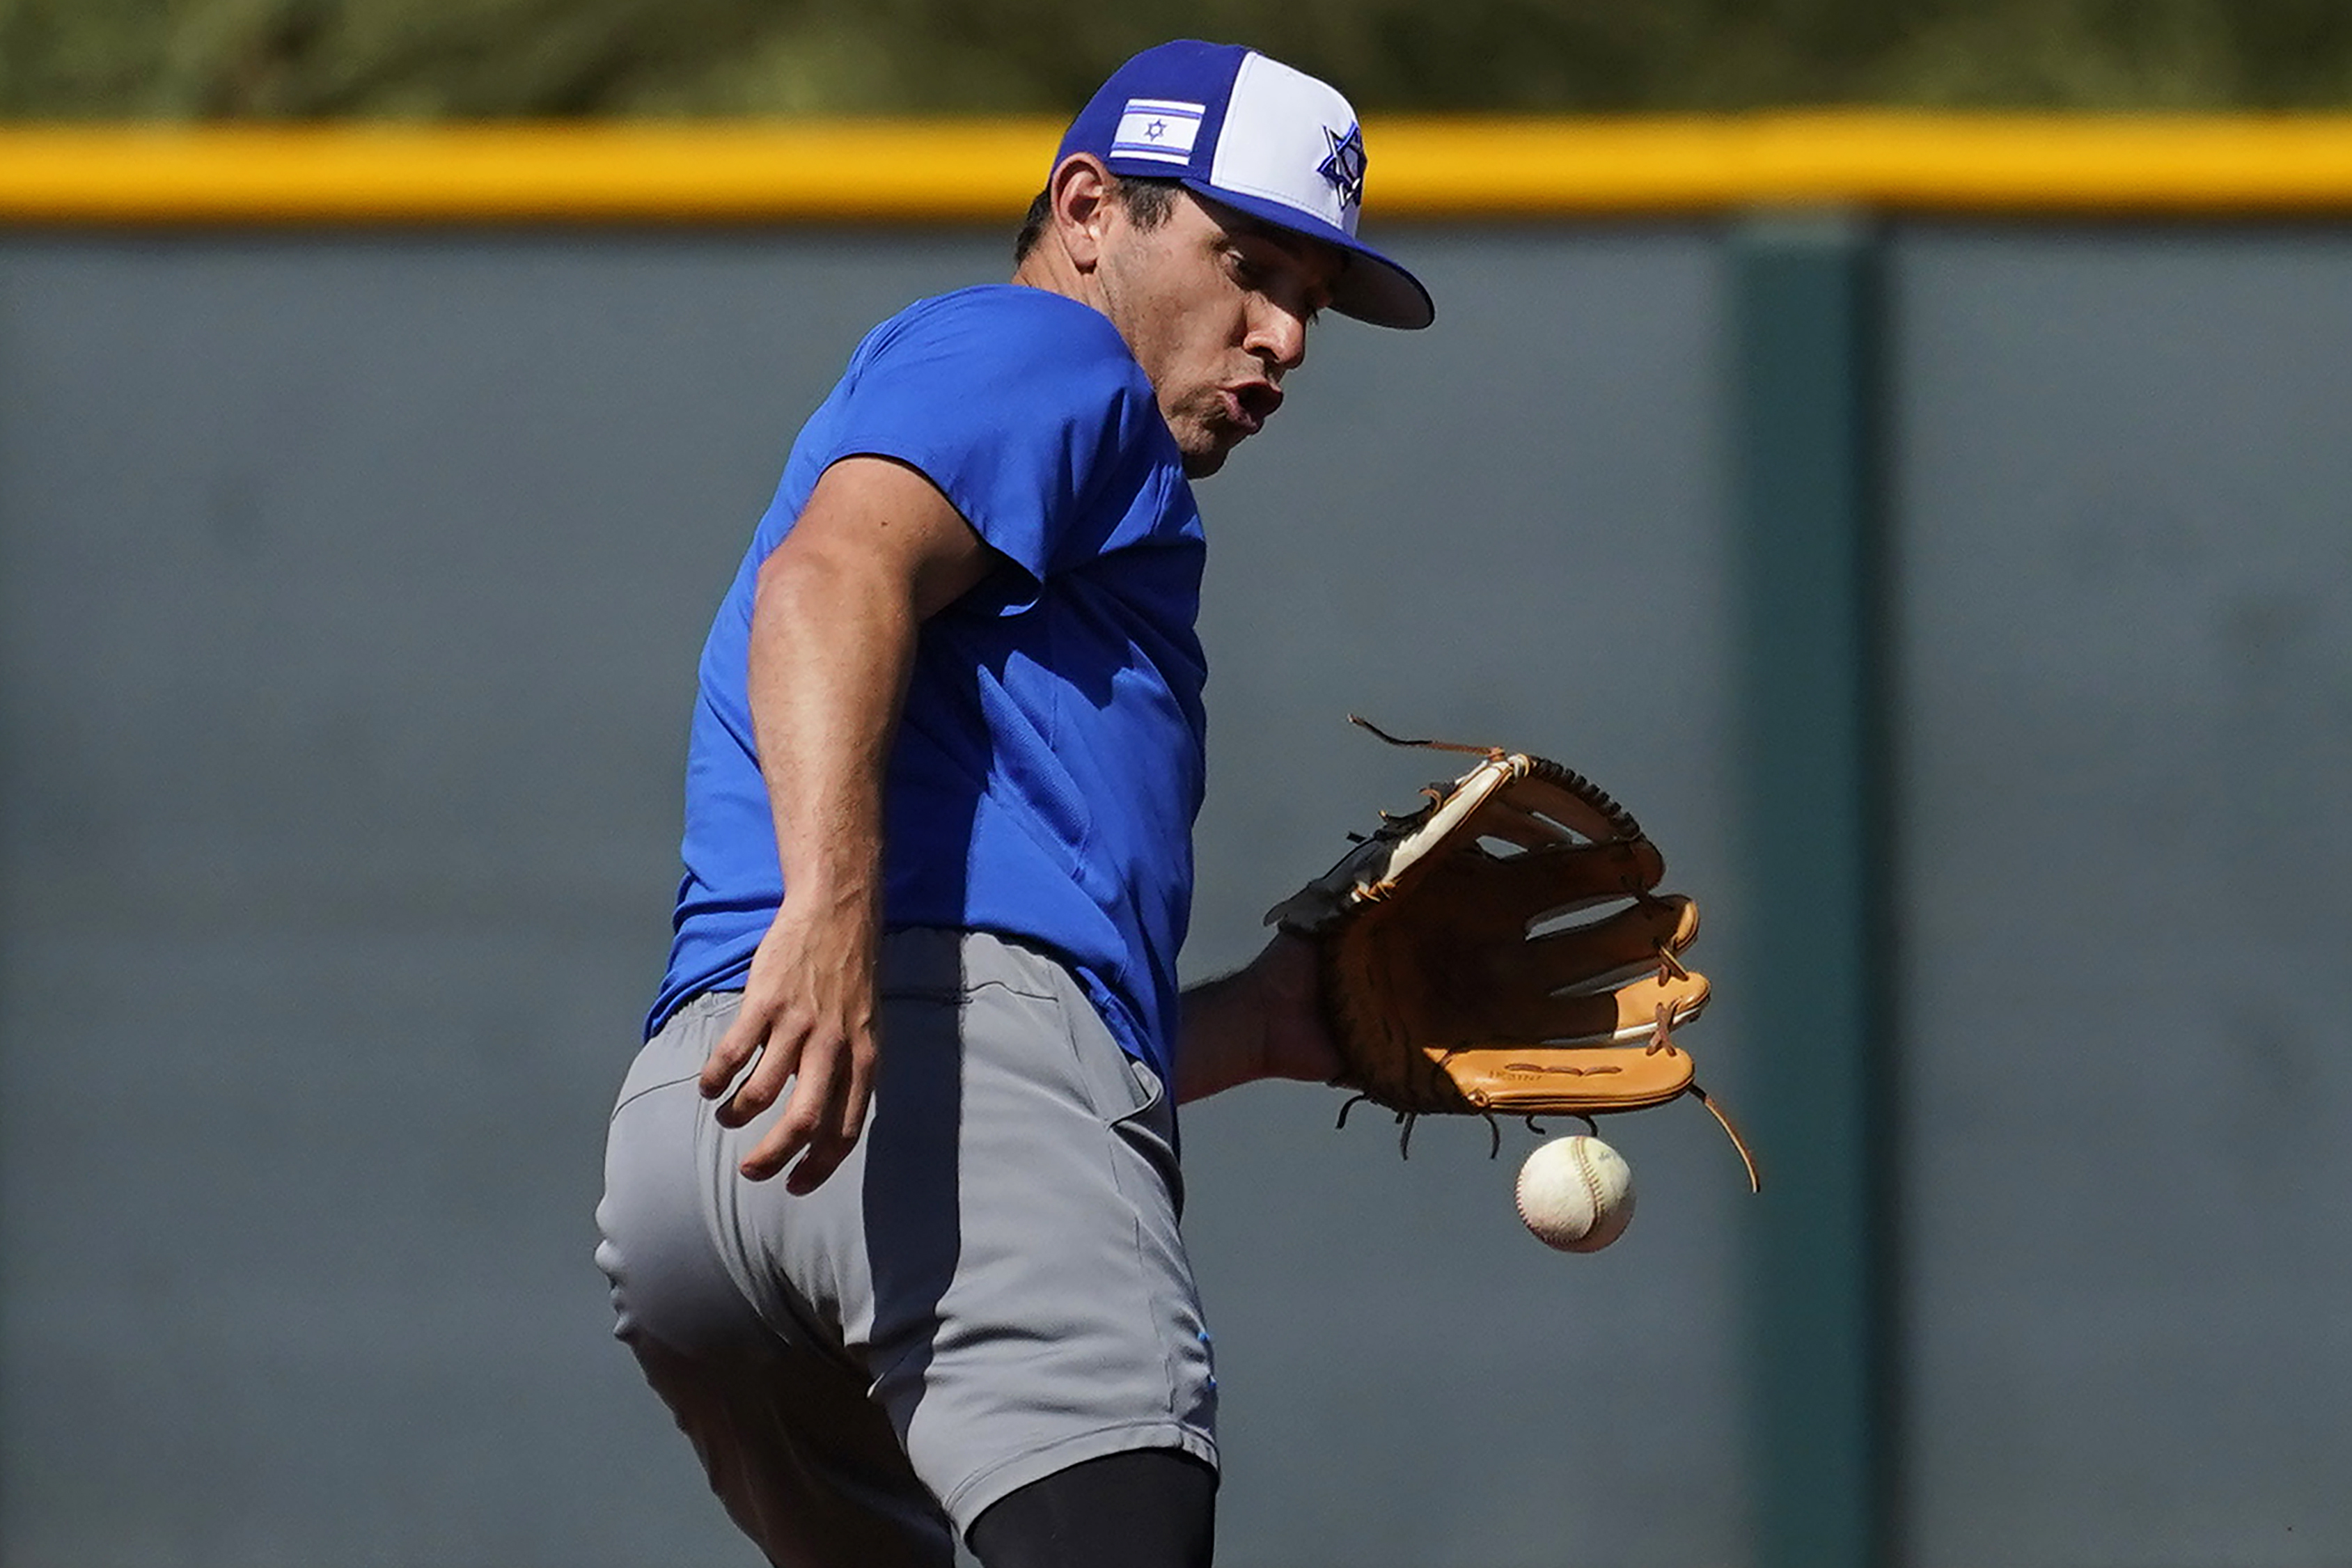 Ian Kinsler's journey to Tokyo began in Israel, where the gritty baseballer  found 'more peace